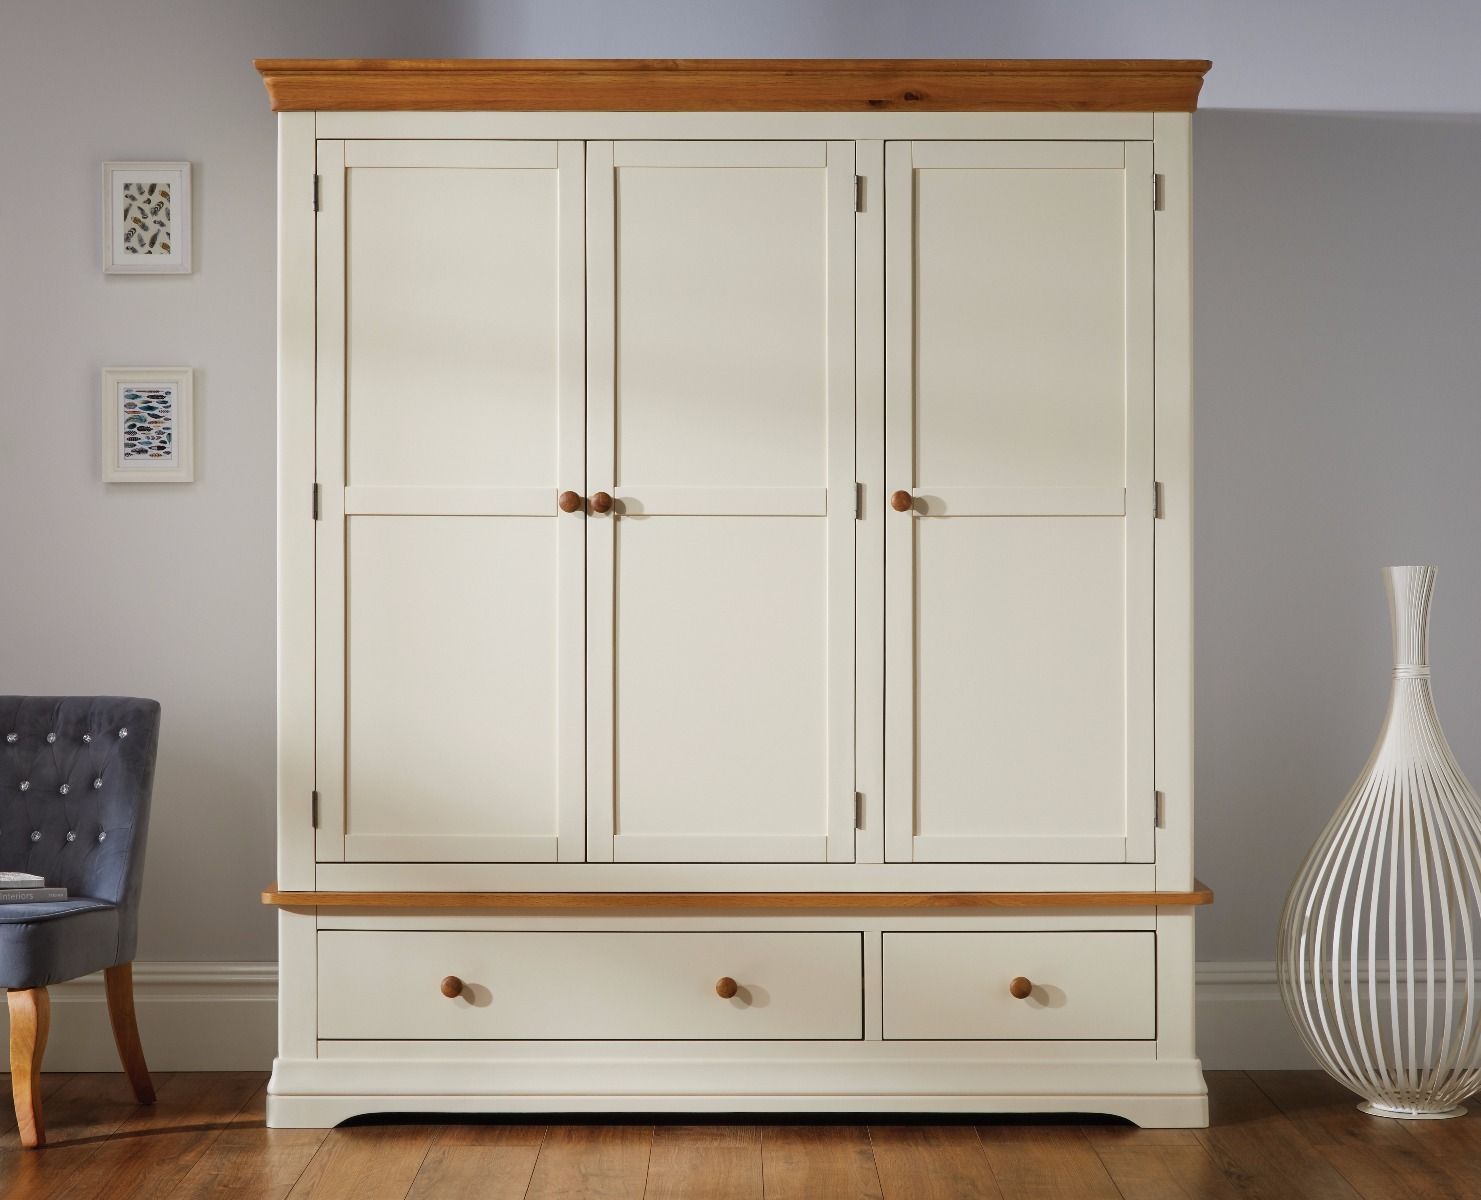 Farmhouse Cream Painted Triple Oak Wardrobe – Free Delivery | Top Furniture Inside Painted Triple Wardrobes (View 14 of 15)